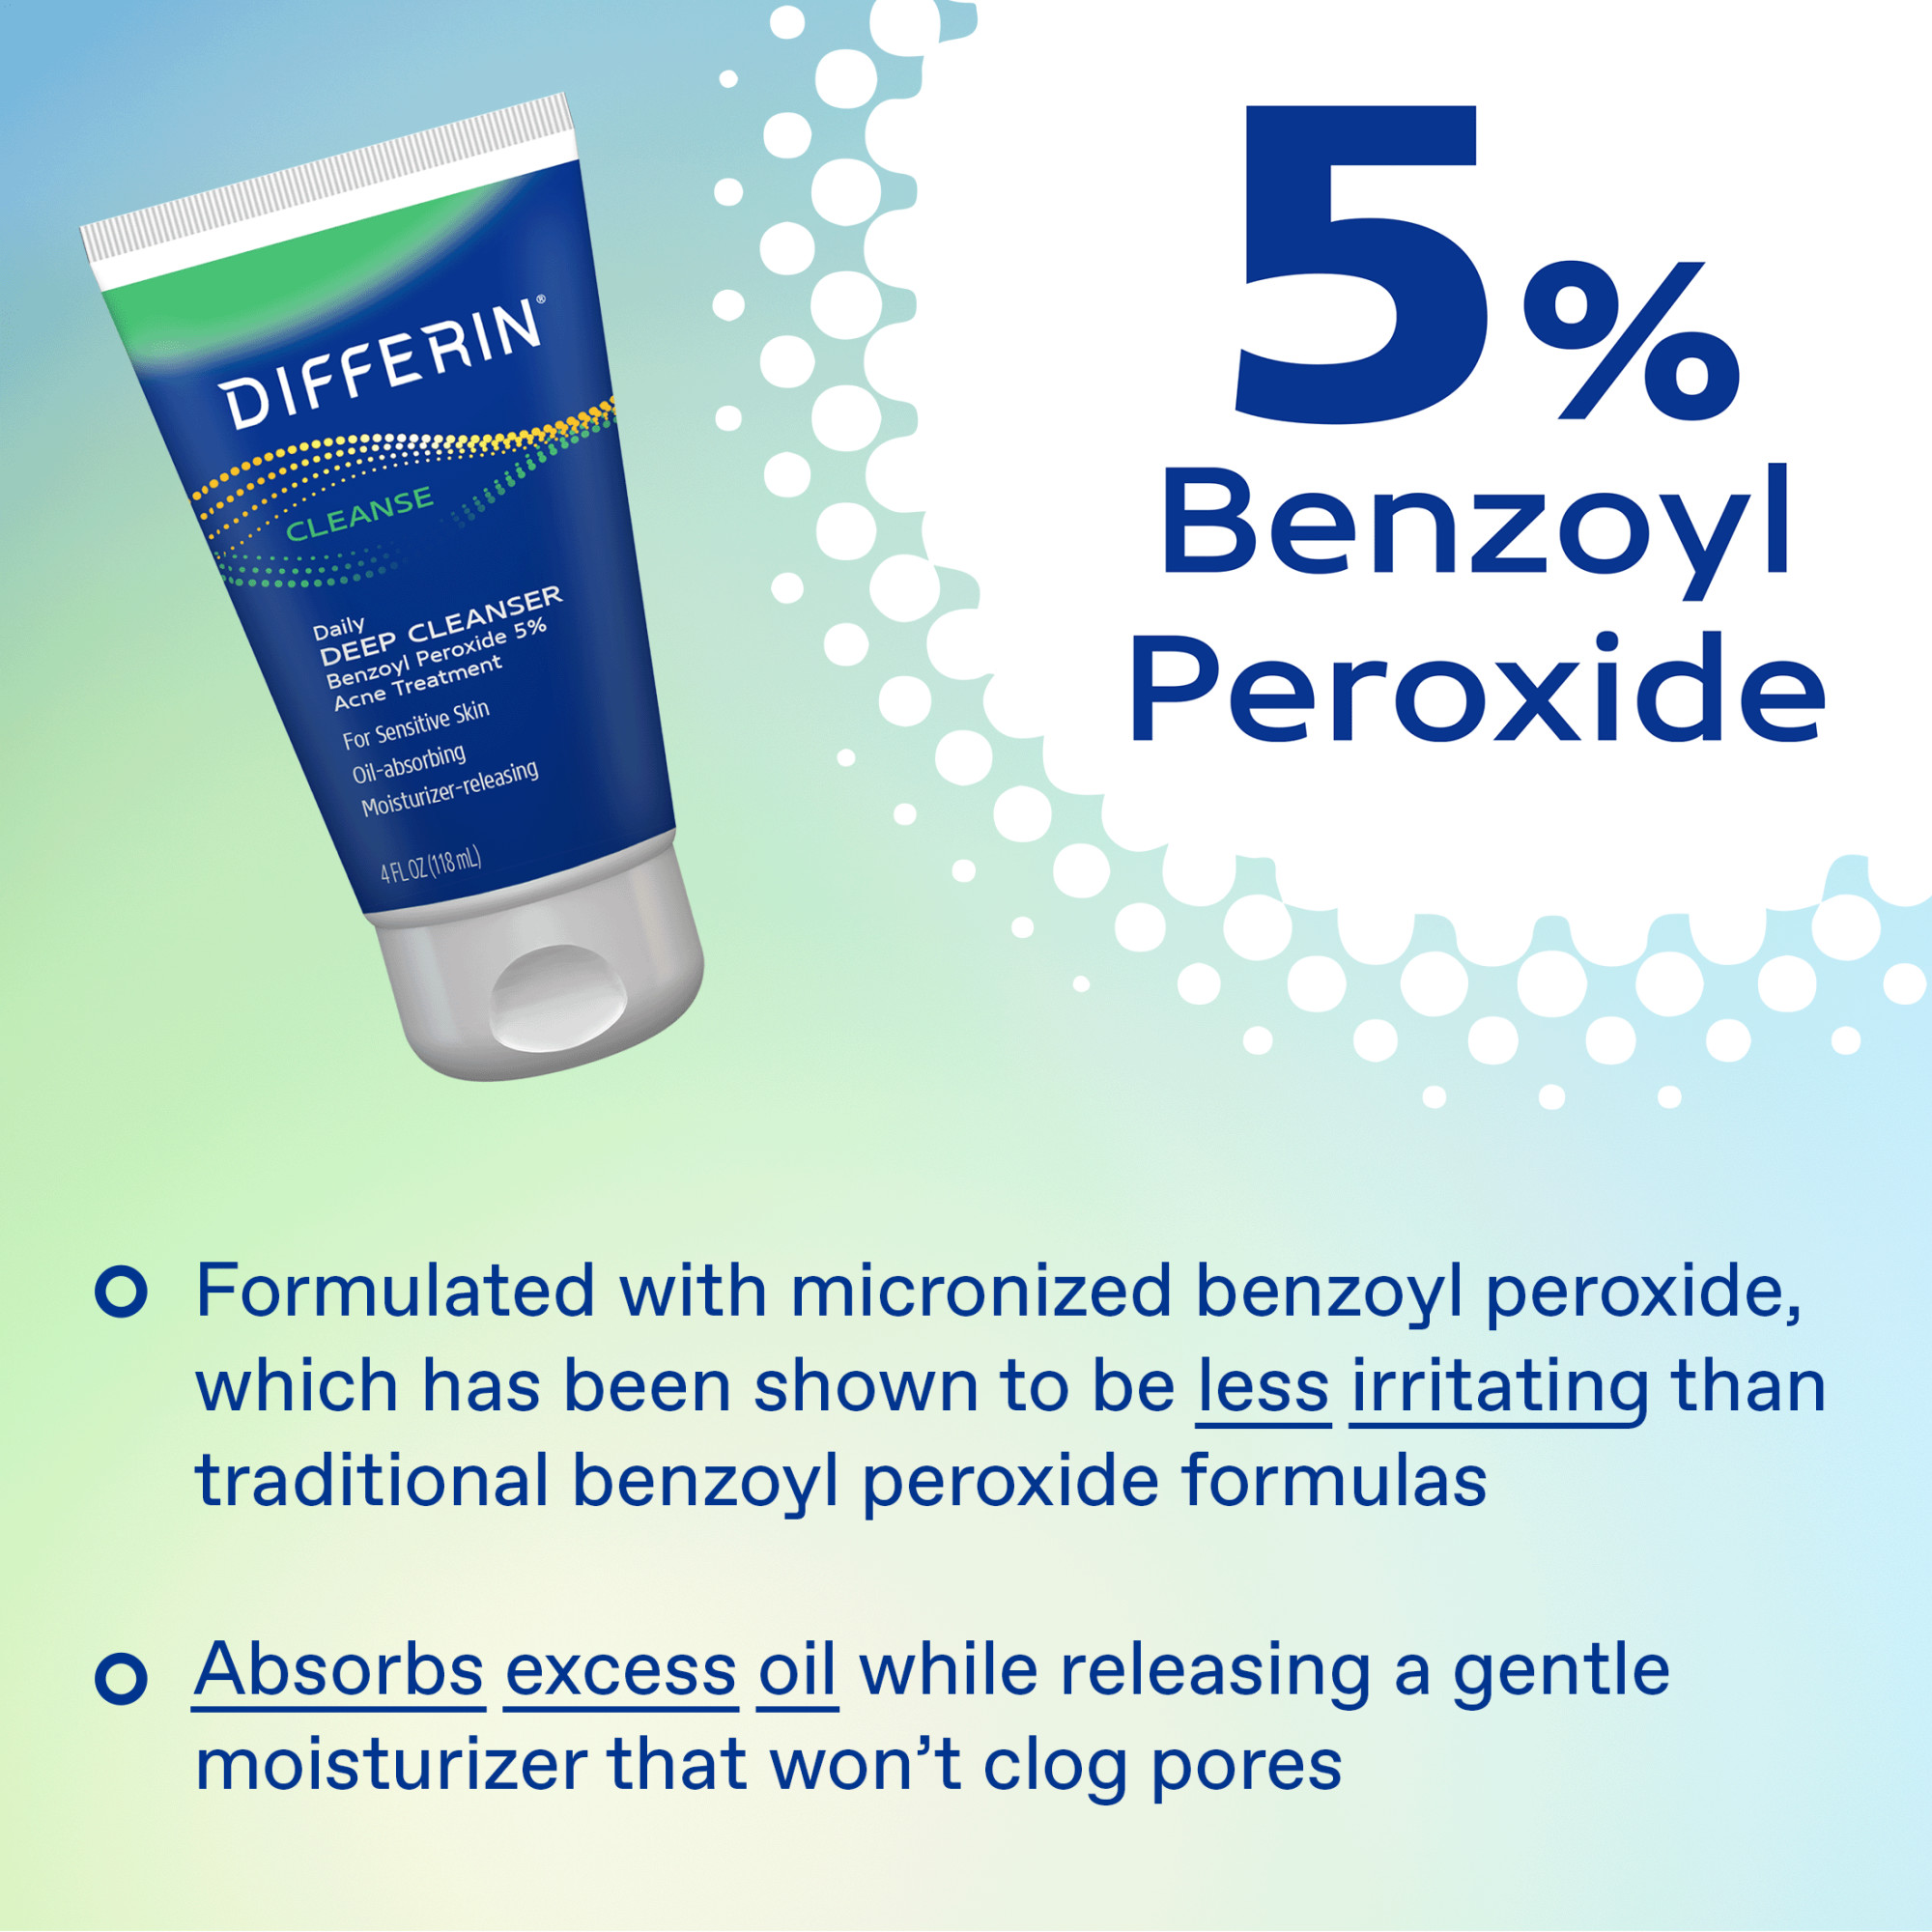 Differin Daily Deep Cleanser with 5% Benzoyl Peroxide, Face Wash for Acne Prone Skin, 4 oz - image 7 of 11